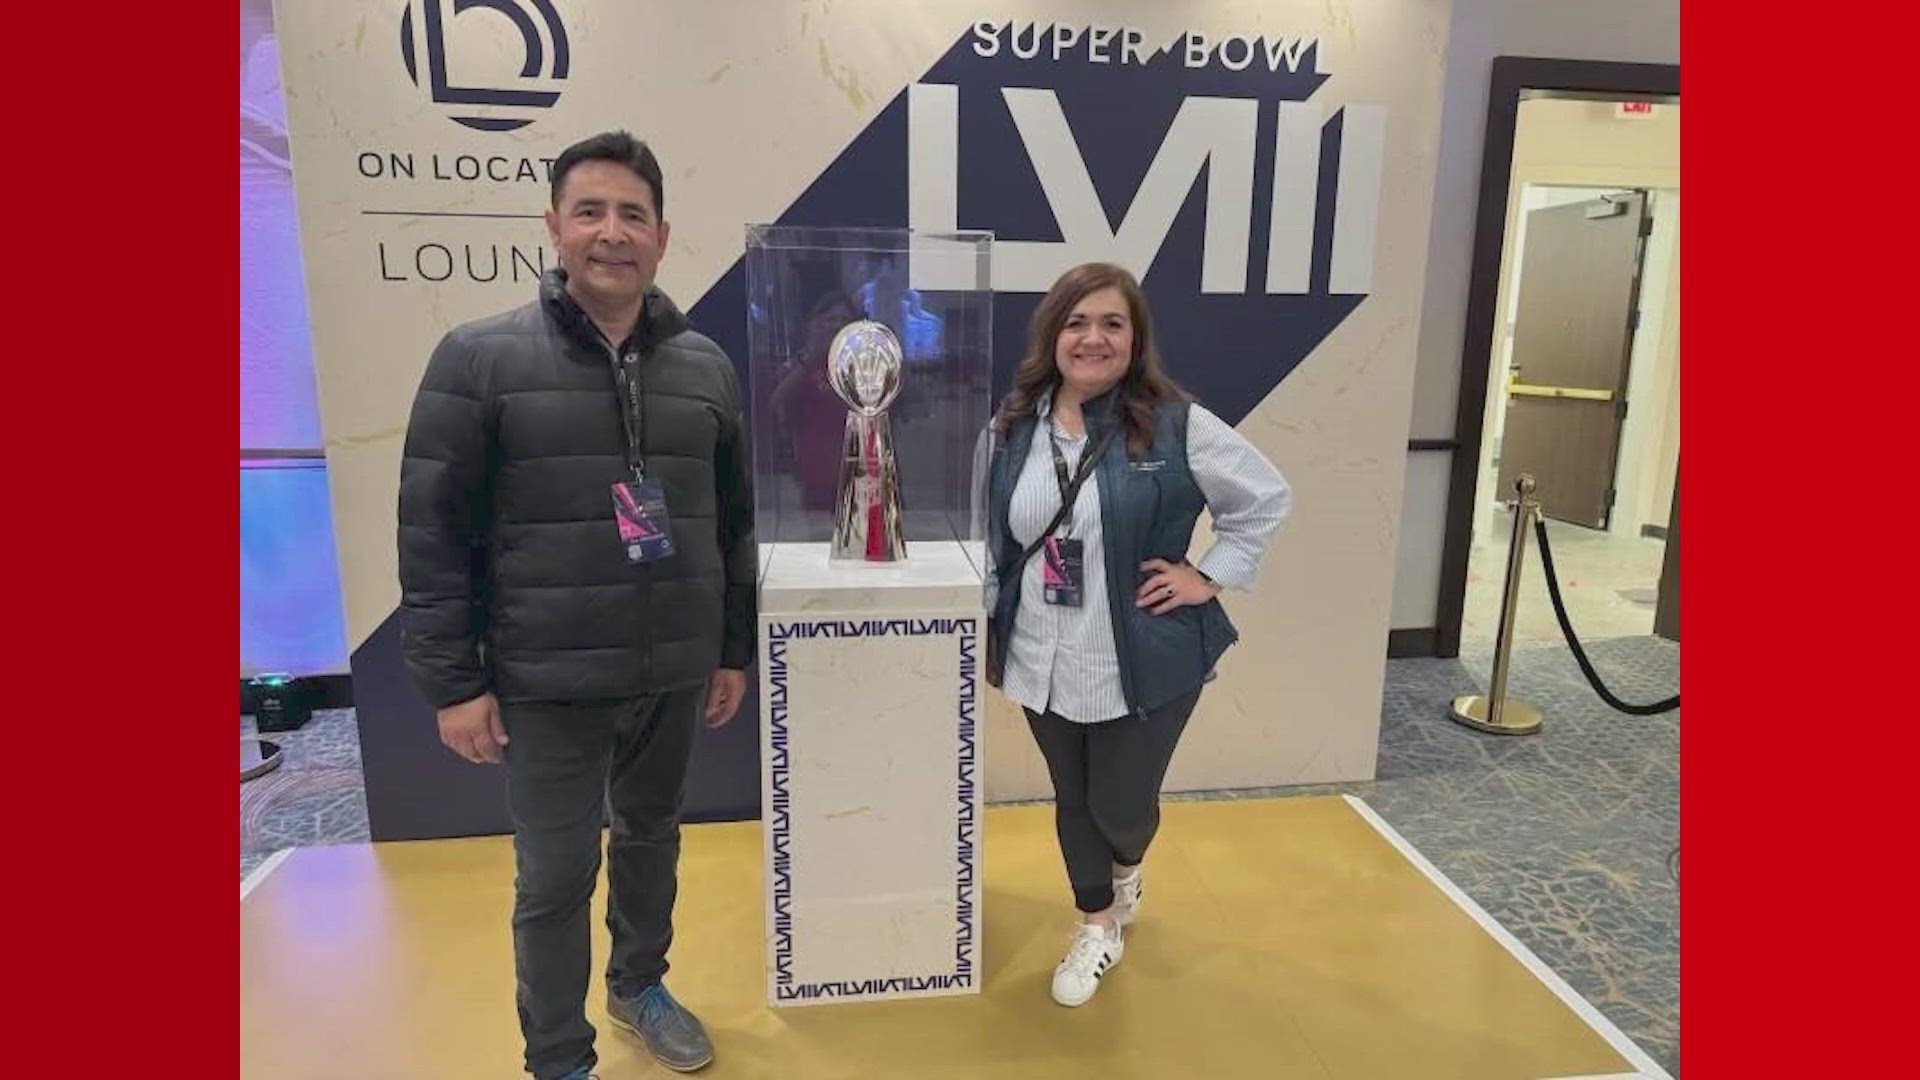 They even have a photo with the Lombardi trophy!